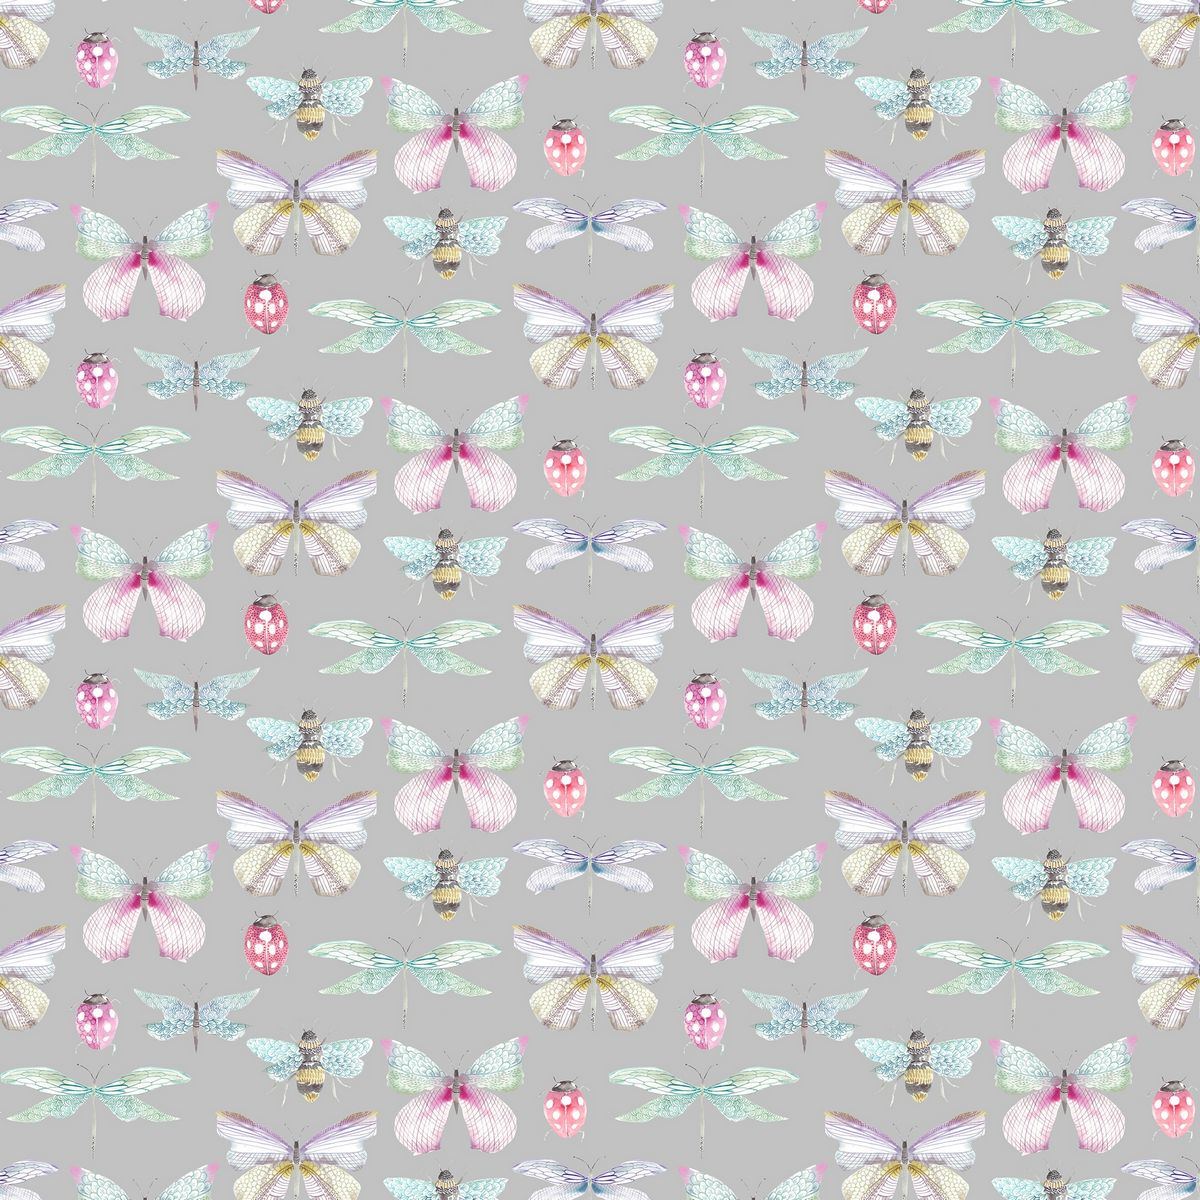 Garden Wings Pastel Fabric by Voyage Maison